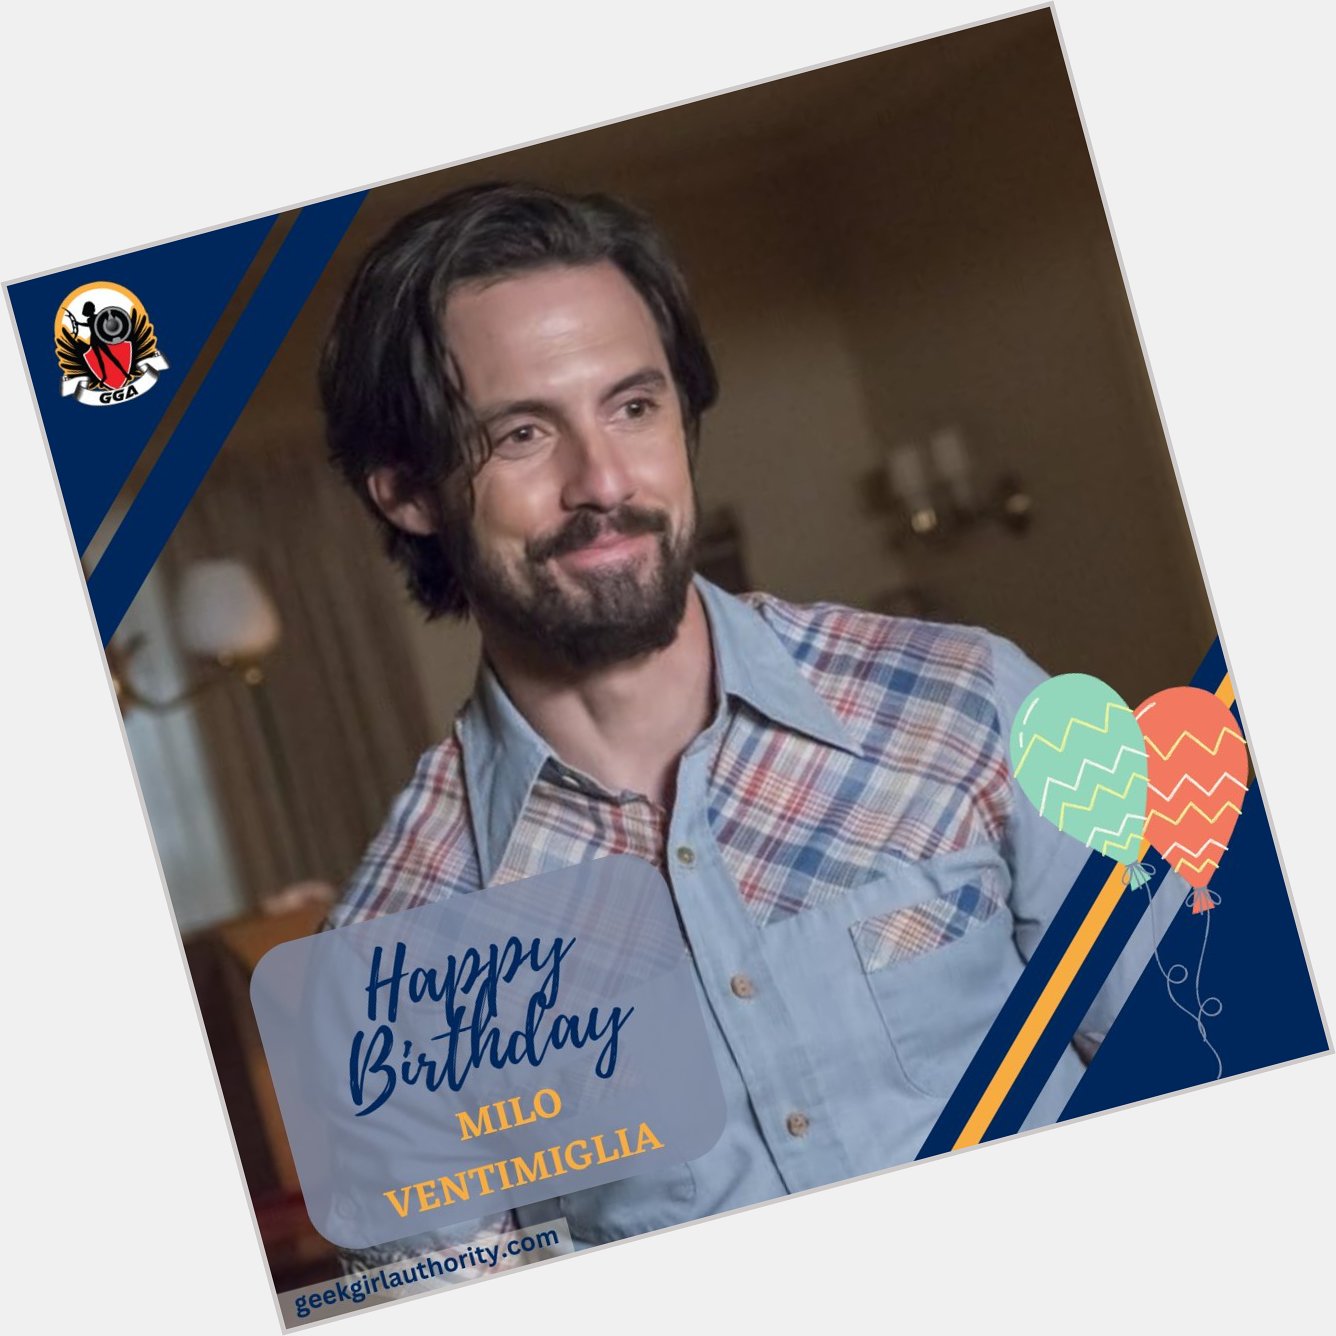 Happy Birthday, Milo Ventimiglia! Which one of his roles is your favorite?   